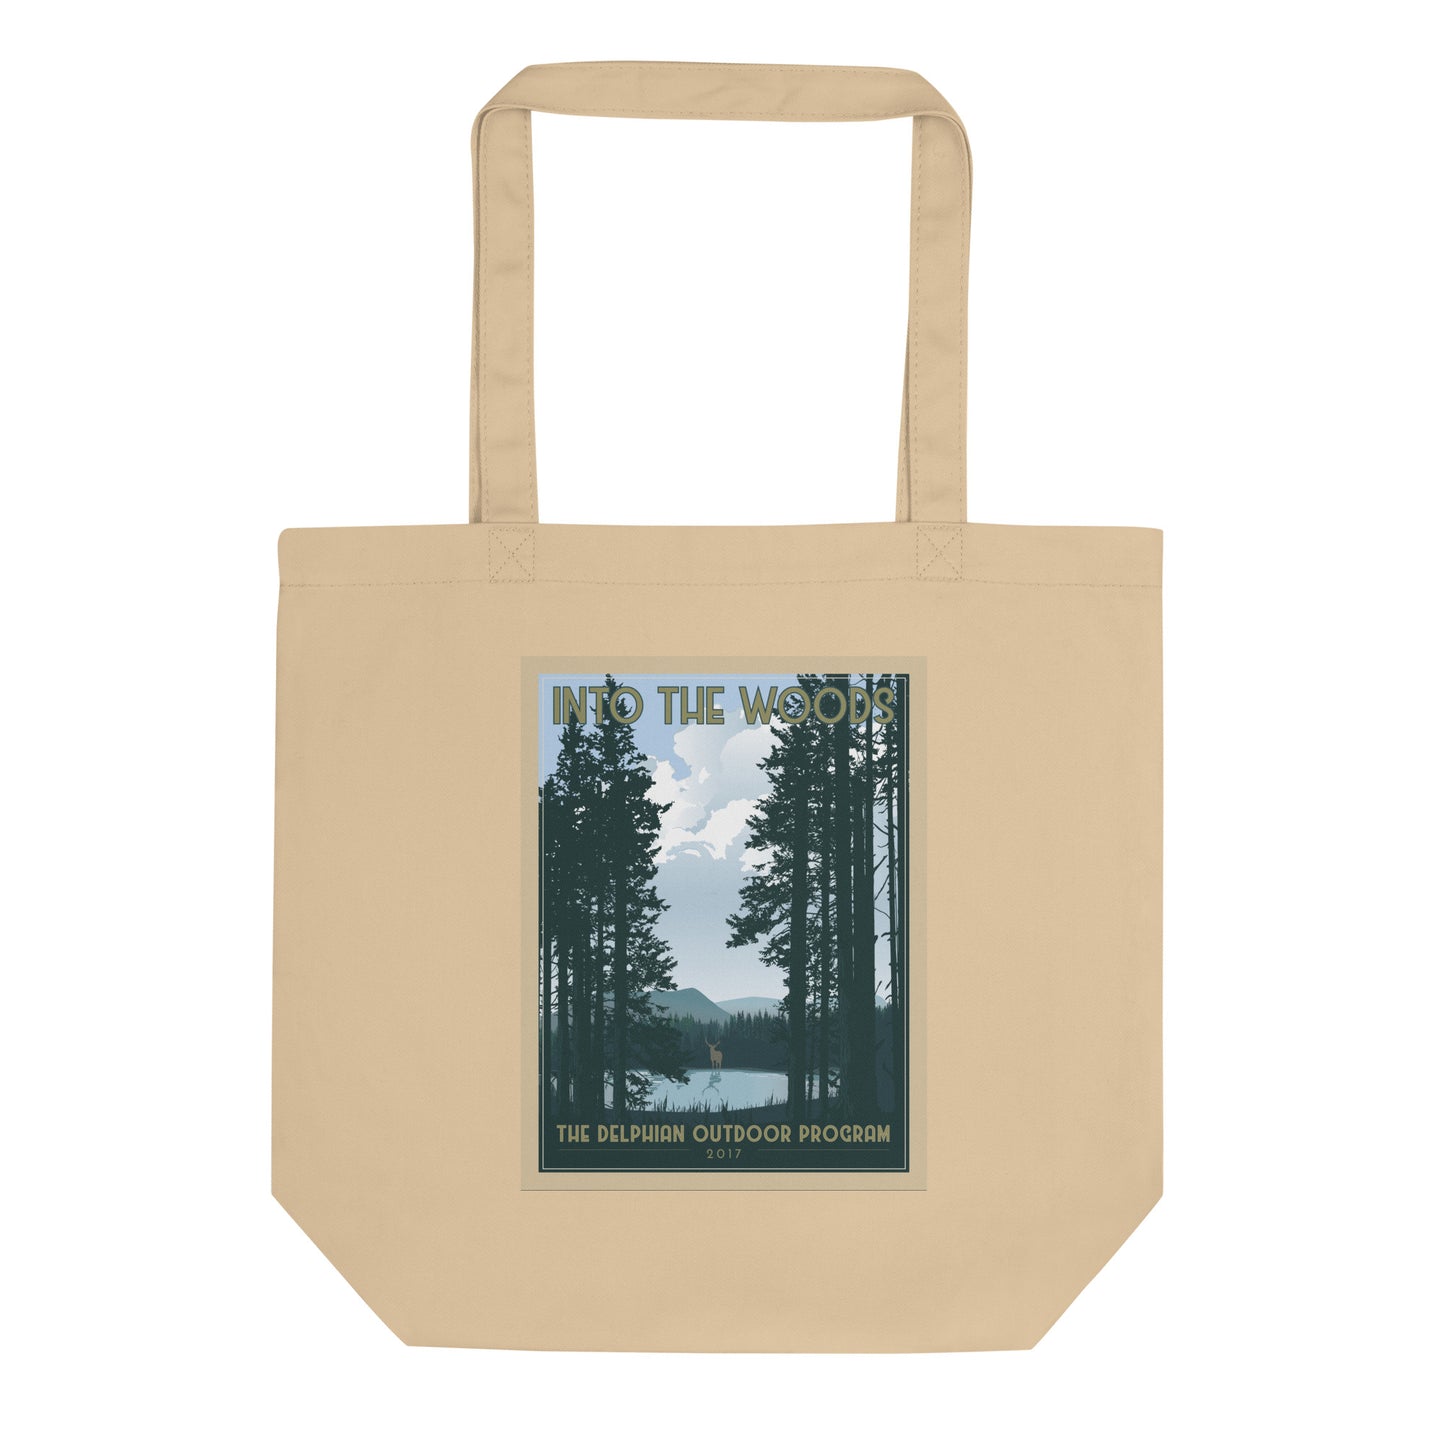 Into The Woods Tote Bag